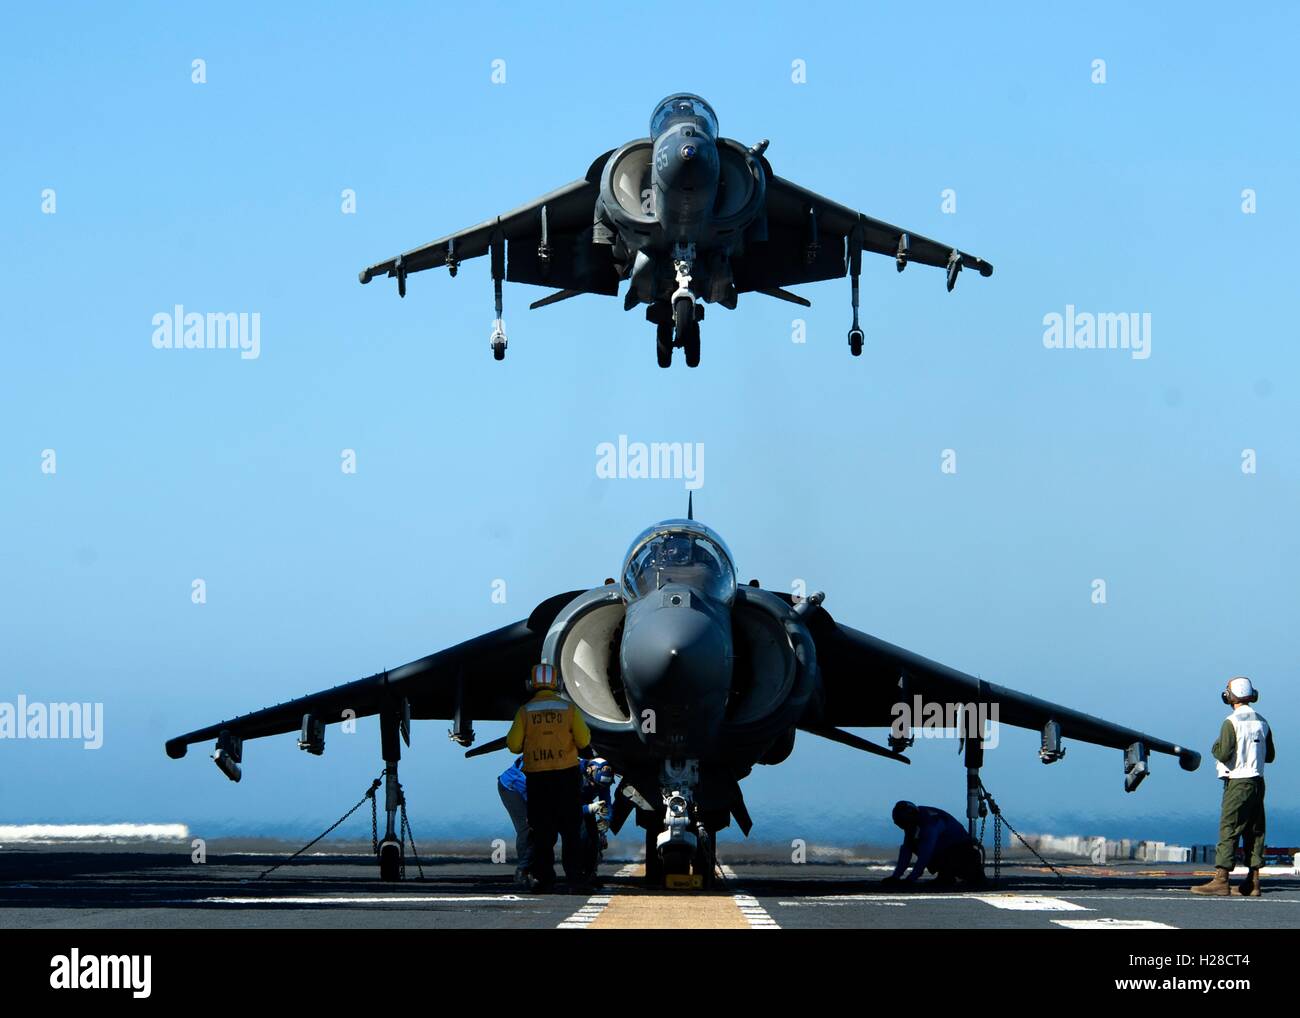 U.S. Marines AV-8B Harrier aircraft prepares to land on the flight deck of the America-class amphibious assault ship USS America during training operations February 26, 2015 in the Pacific Ocean. Stock Photo